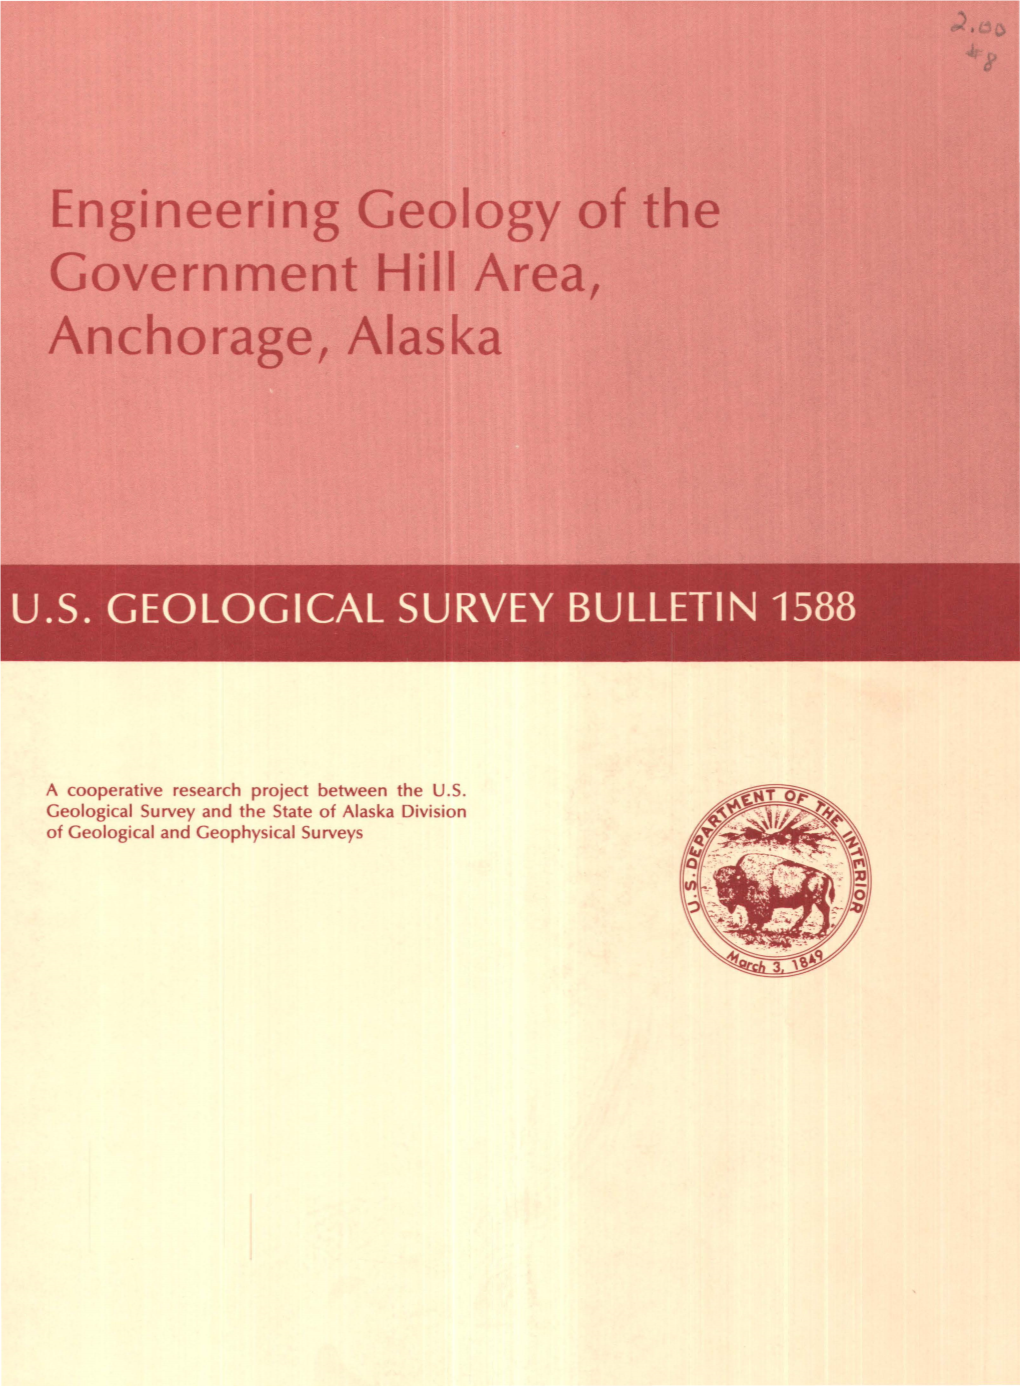 Engineering Geology of Tbe Government Hill Area, Anchorage, Alaska